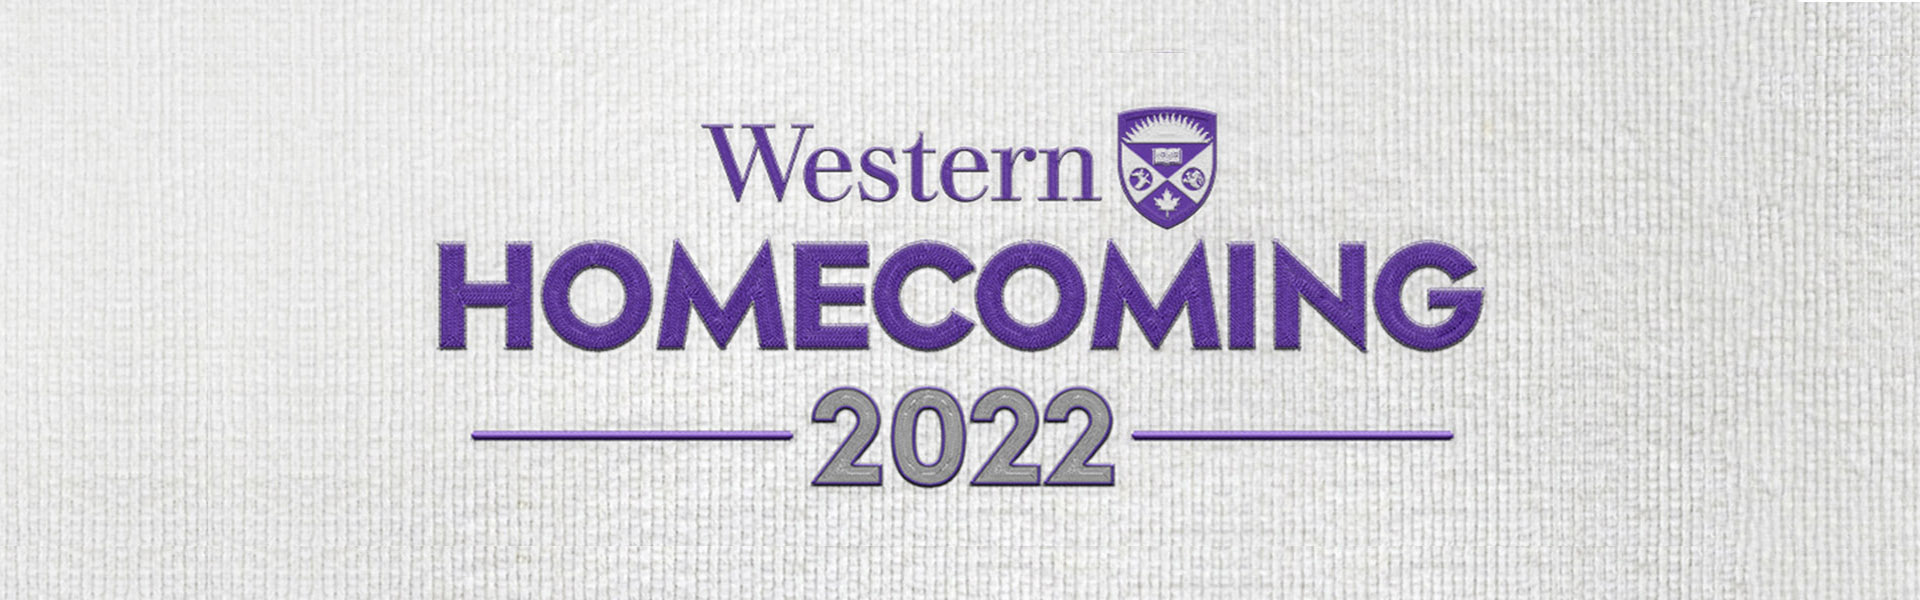 Homecoming 2022 banner in purple text with grey pattern background